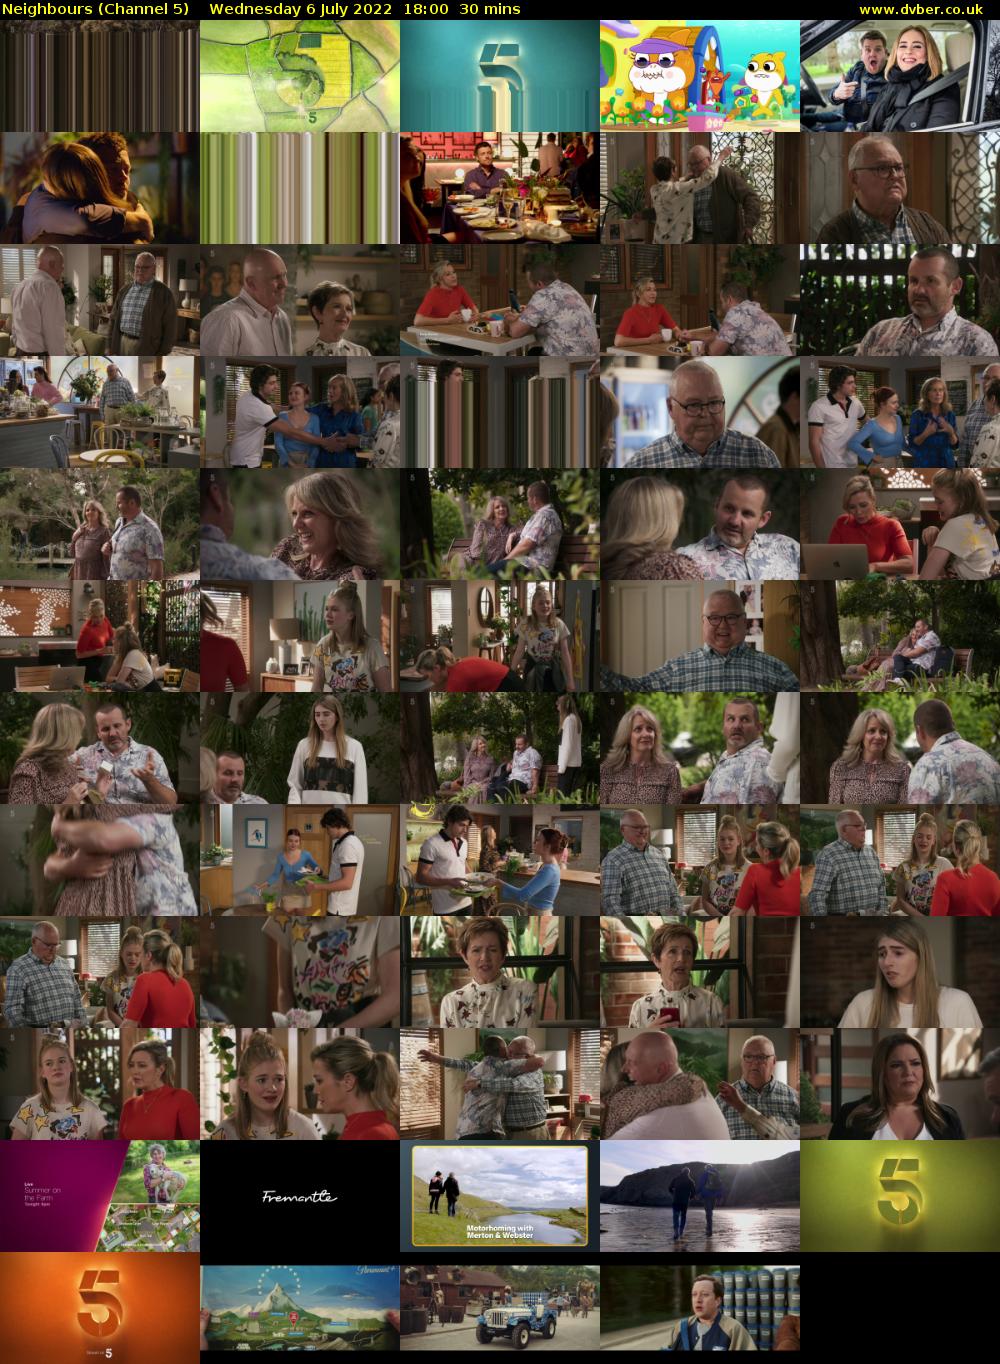 Neighbours (Channel 5) Wednesday 6 July 2022 18:00 - 18:30